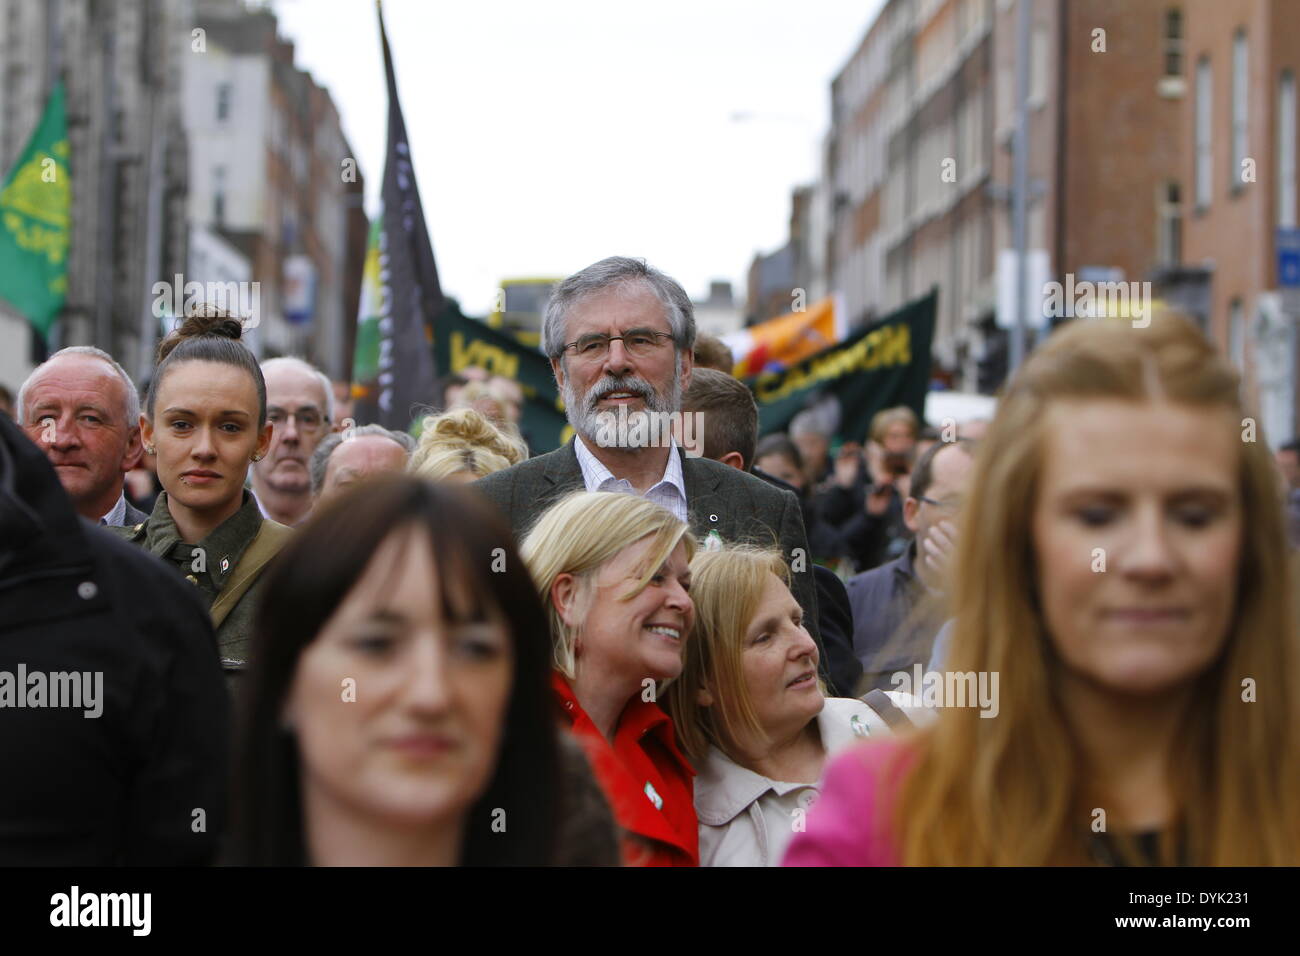 Dublin, Ireland. 20th April 2014. Sinn Fein president Gerry Adams walks in the middle of the crowd at the commemoration march. Sinn Fein president Gerry Adams led the Sinn Fein commemoration of the 98th anniversary of the Easter Rising of 1916. The party supporters marched from the Garden of Remembrance to the General Post office (GPO) for a rally. Credit:  Michael Debets/Alamy Live News Stock Photo